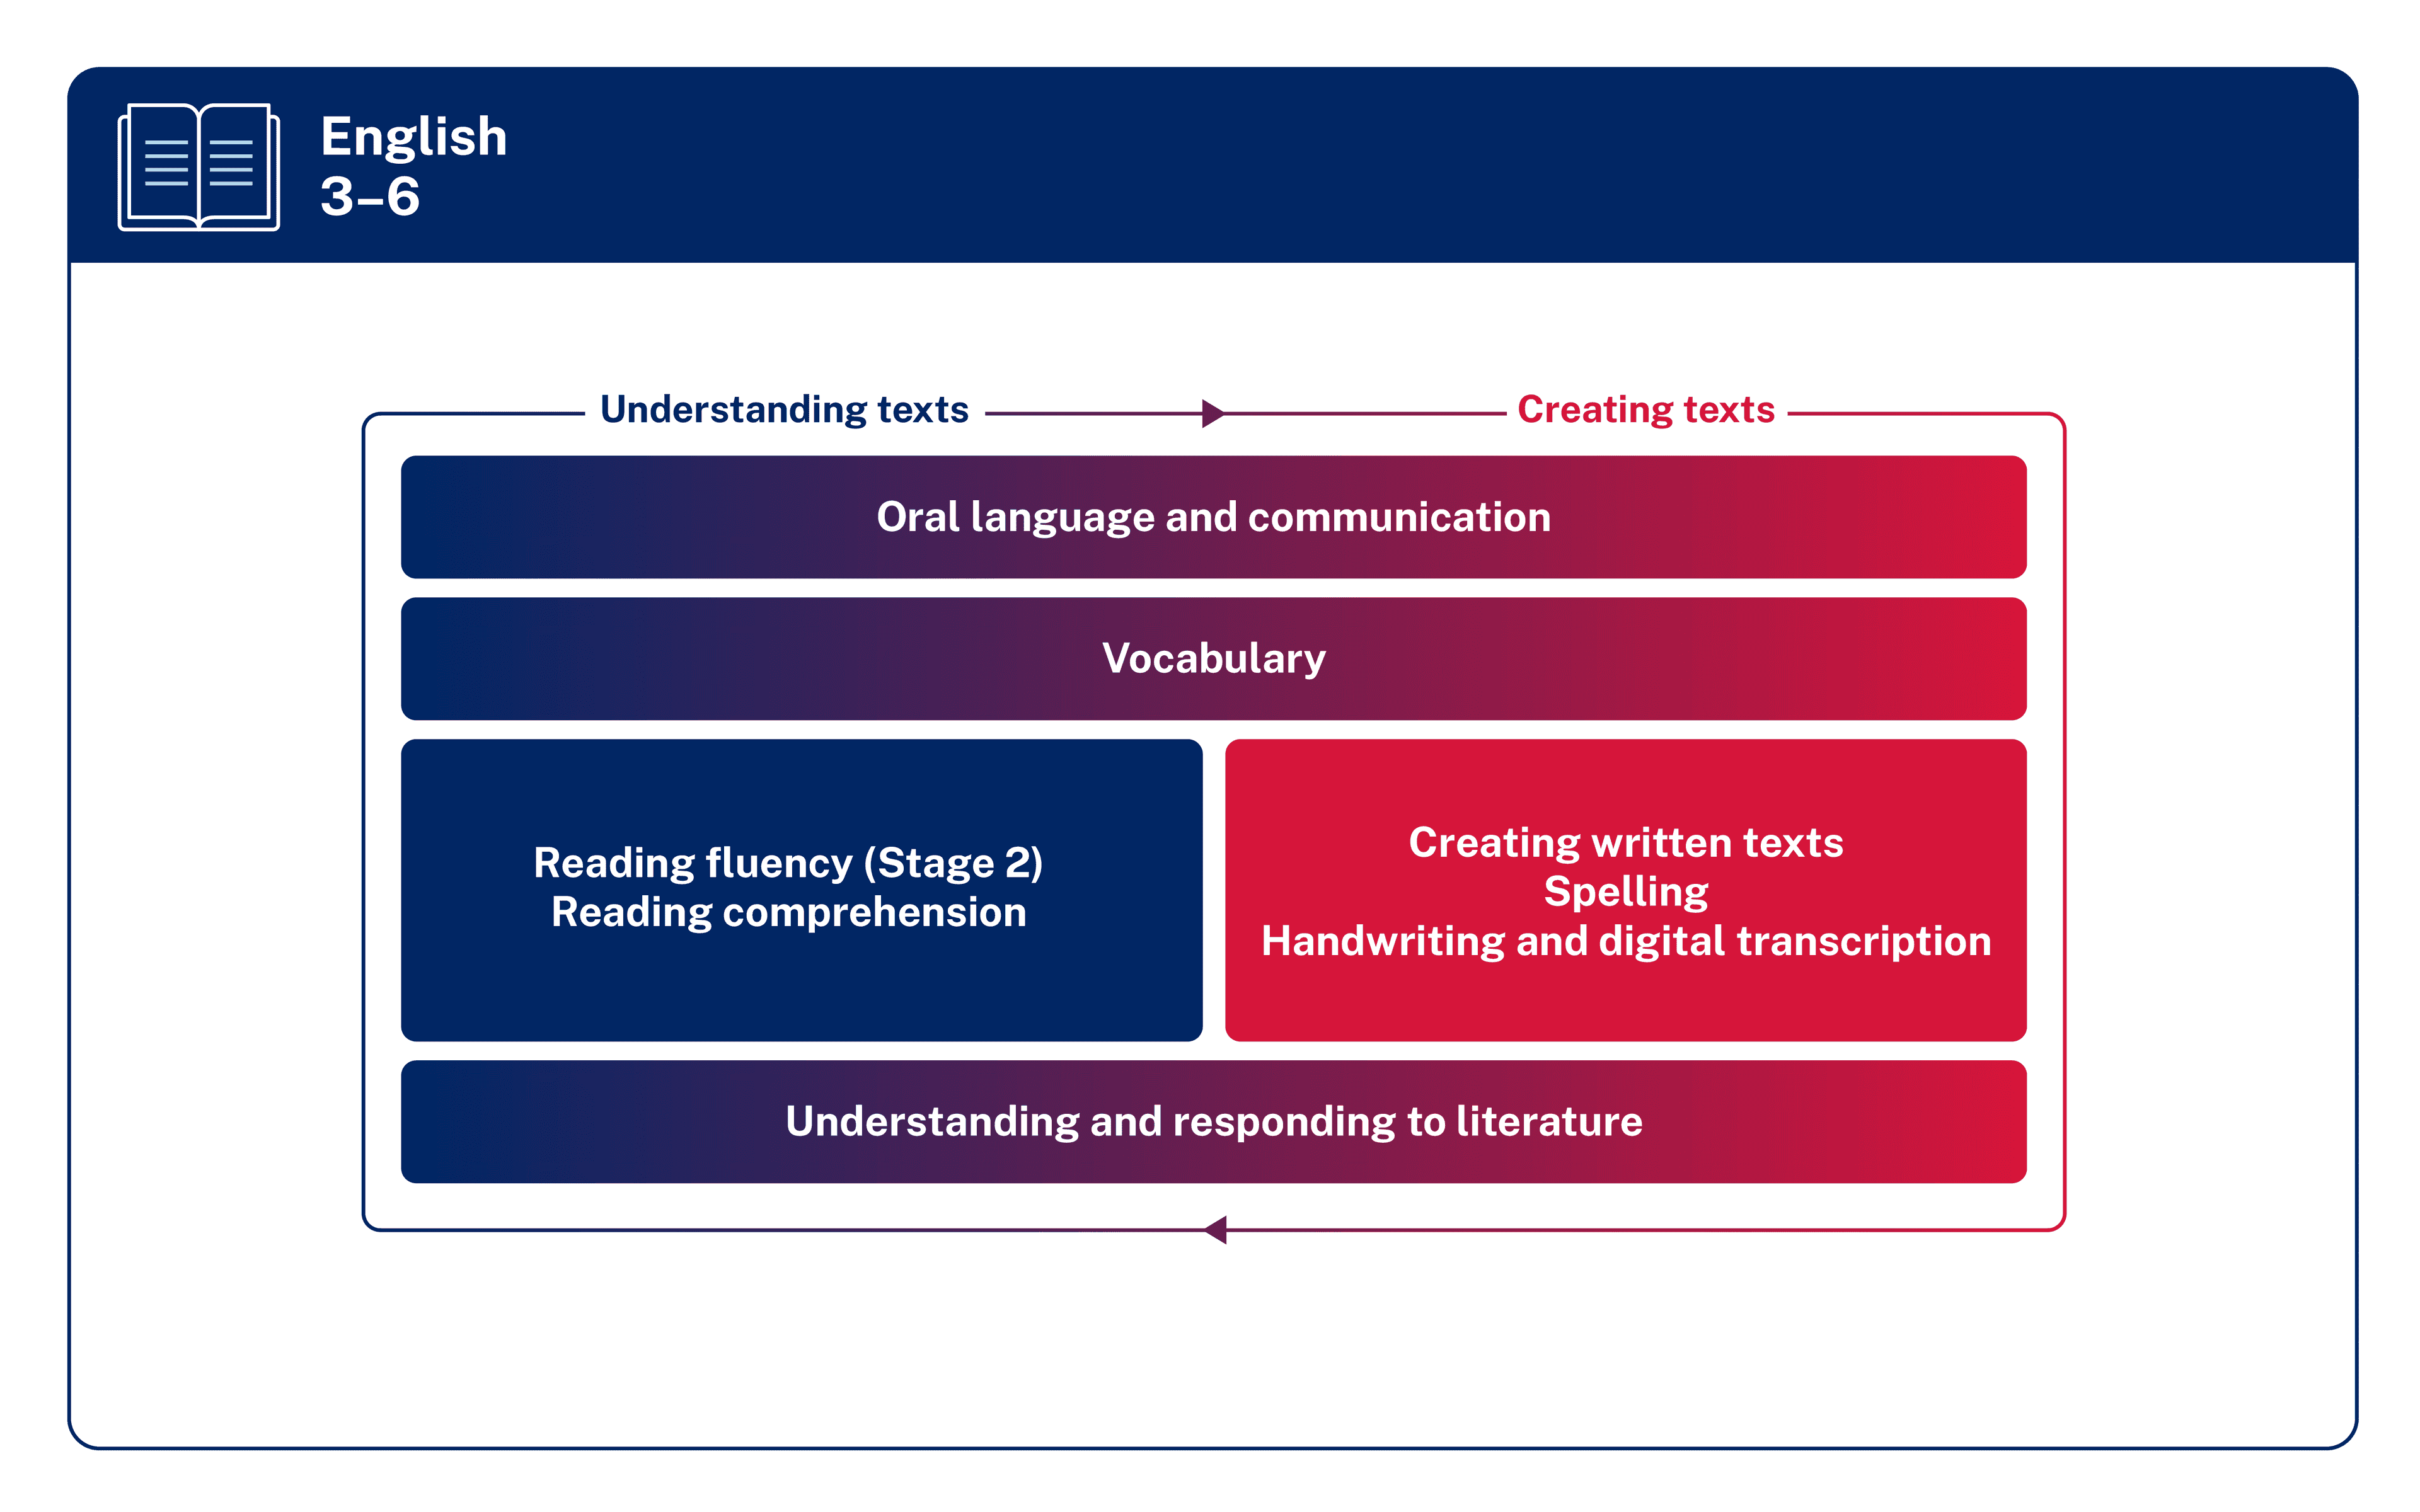 The figure shows the connection between Understanding Texts and Creating Texts across English 3–6 focus areas.